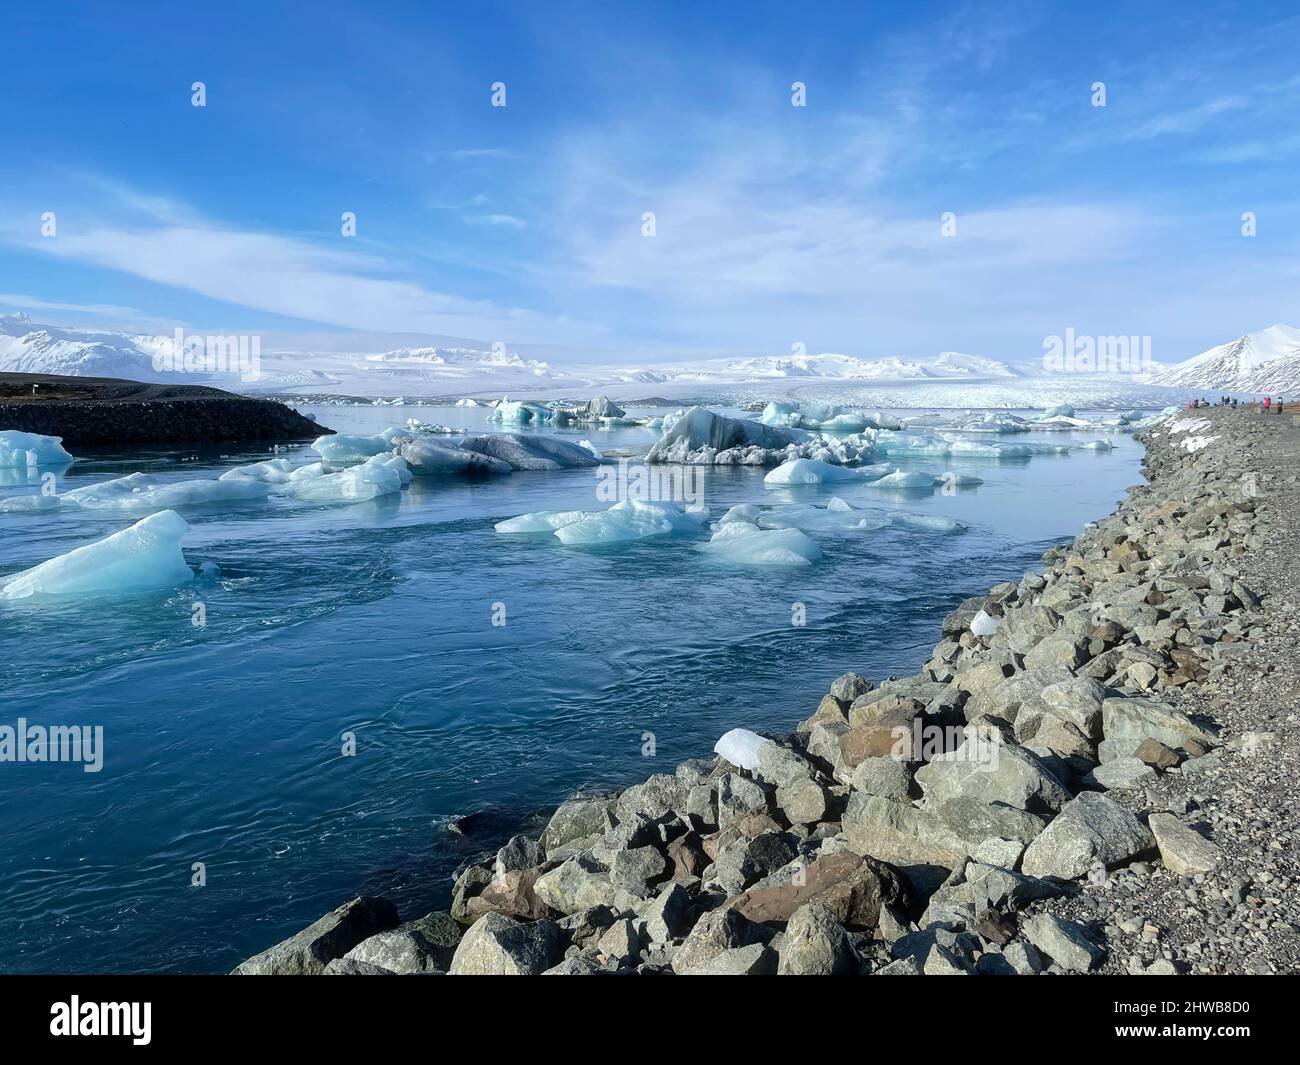 Icy coastal landscape in a shore of Iceland, full of big pieces of ice on the beach and floating in the water. Stock Photo